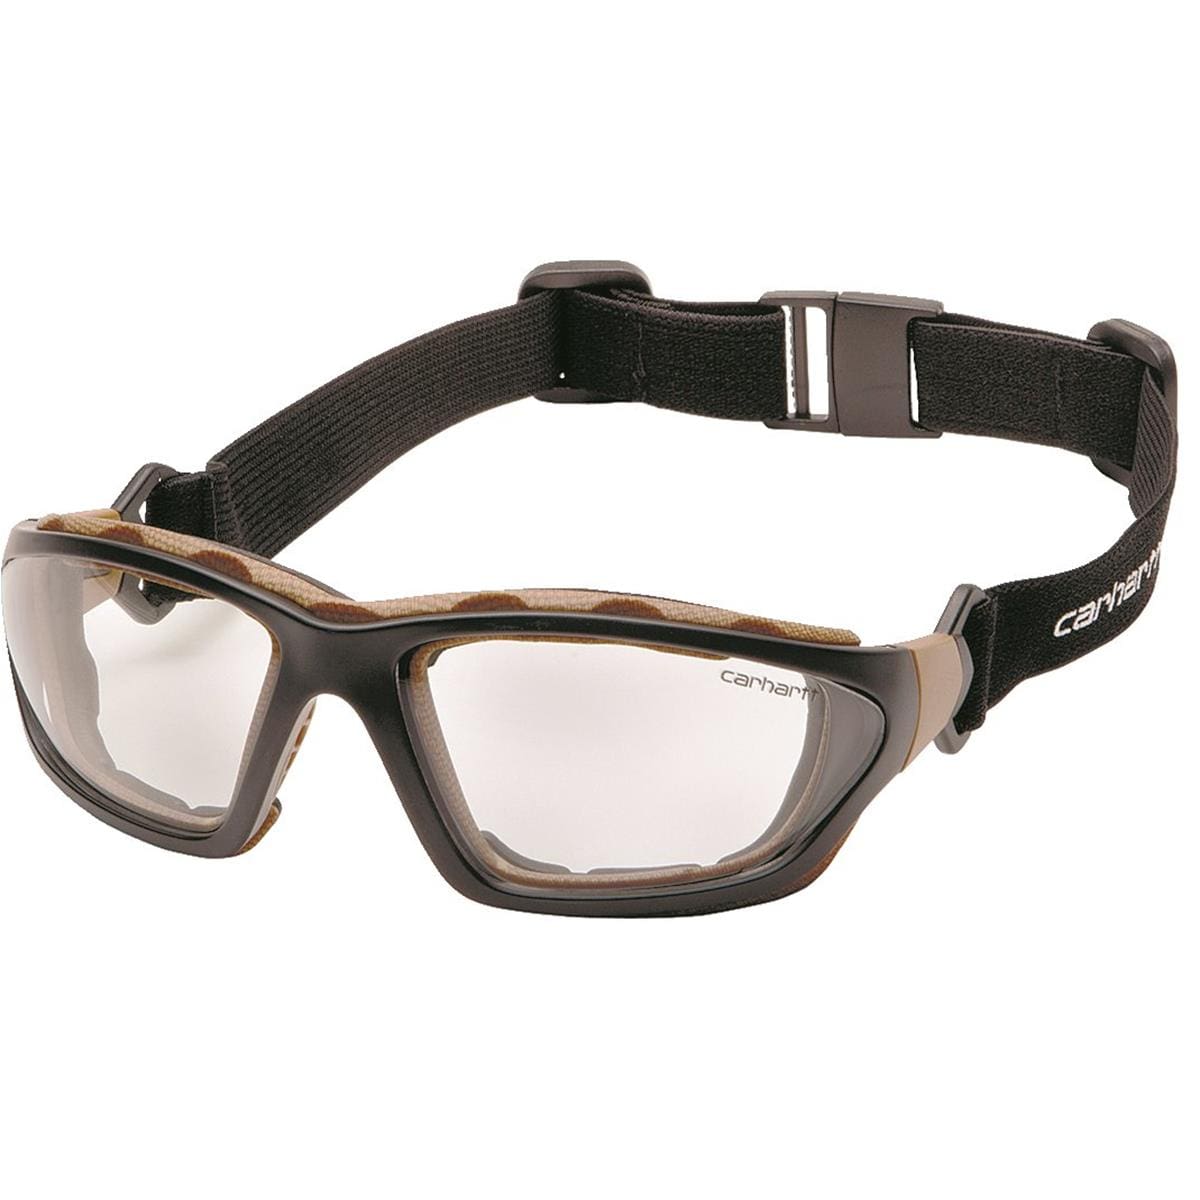 CARHARTT Carthage™ Sealed Safety Glasses/Goggles